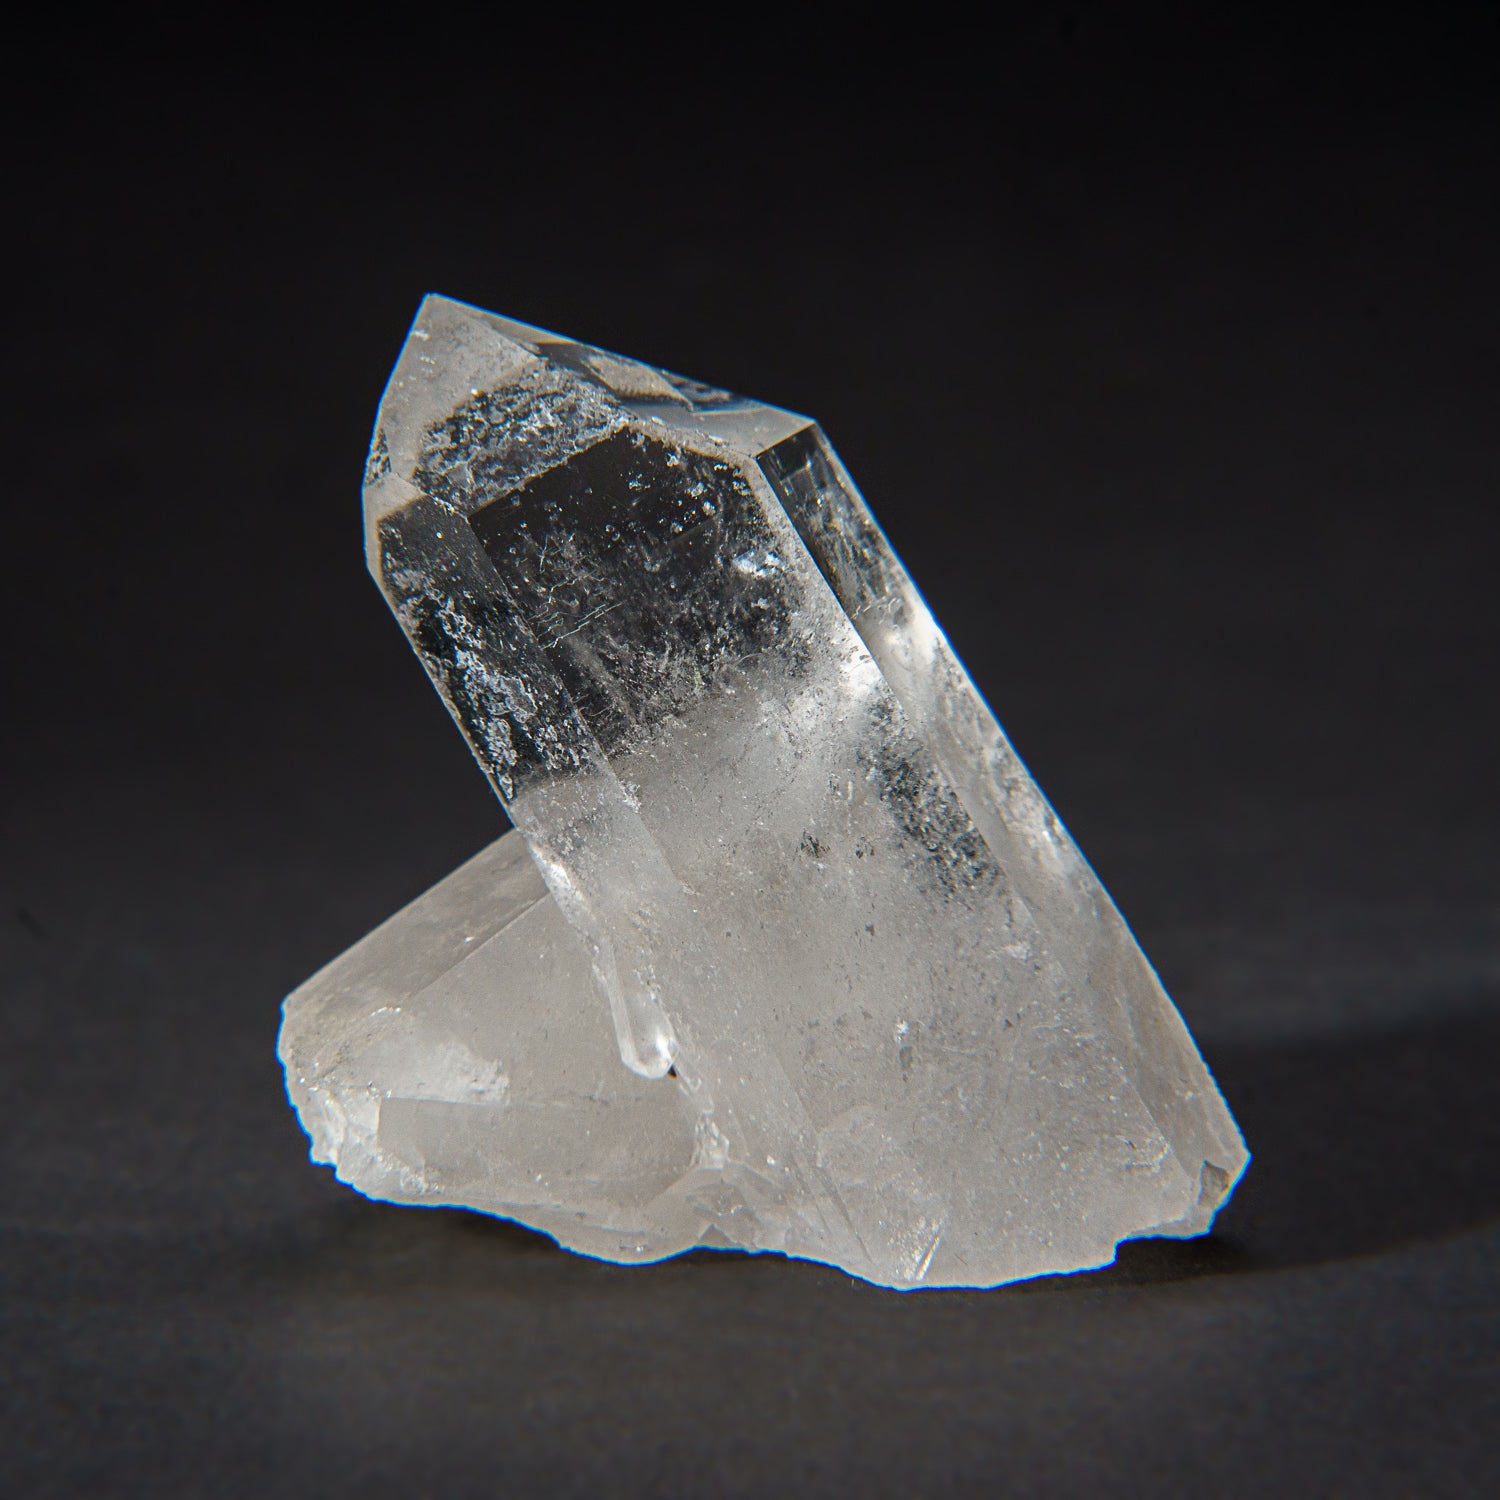 Genuine Clear Quartz Crystal Cluster Point from Brazil (163.7 grams)